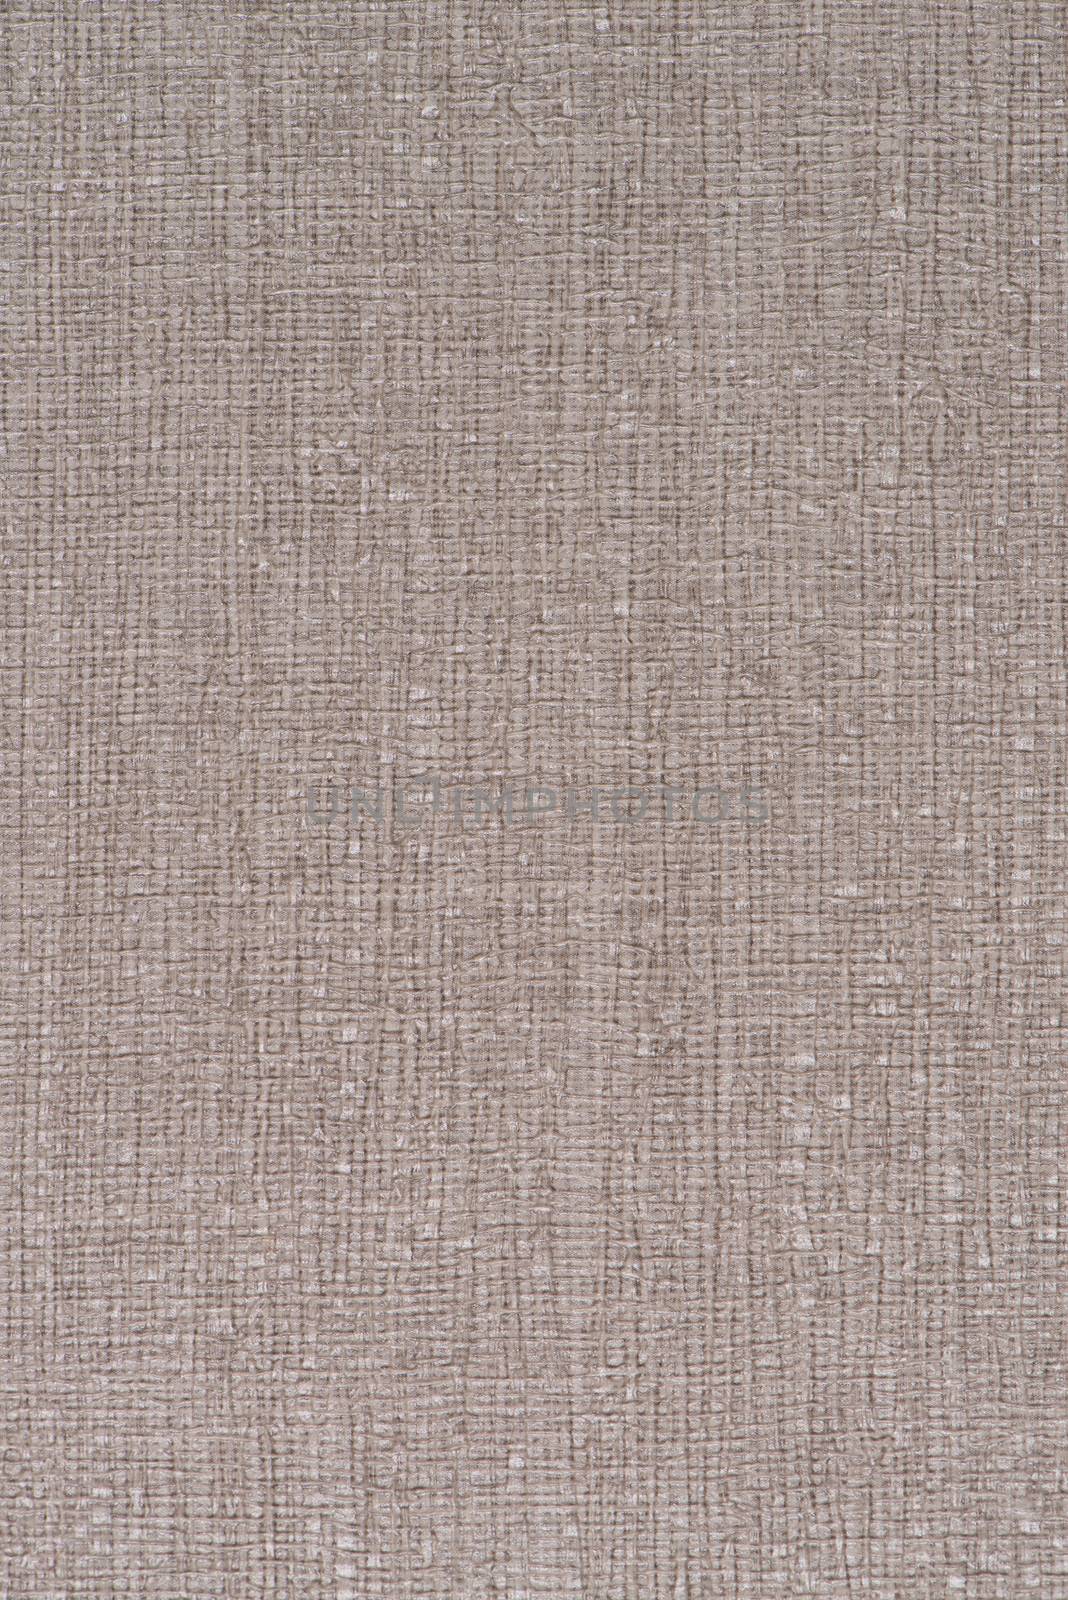 Beige wallpaper embossed texture for background.